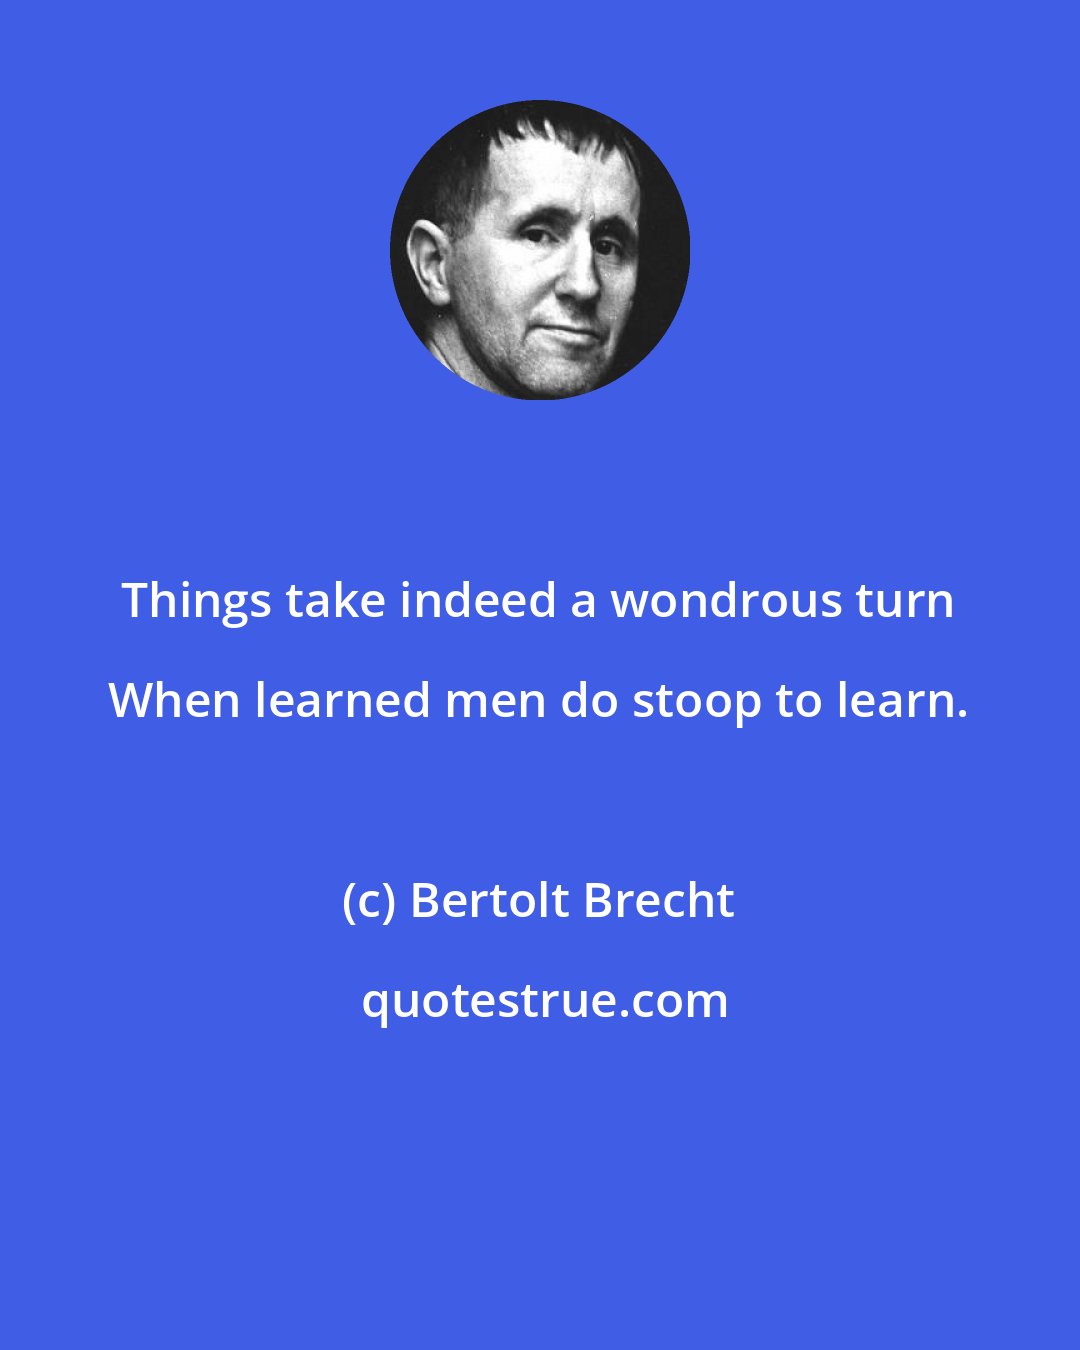 Bertolt Brecht: Things take indeed a wondrous turn When learned men do stoop to learn.